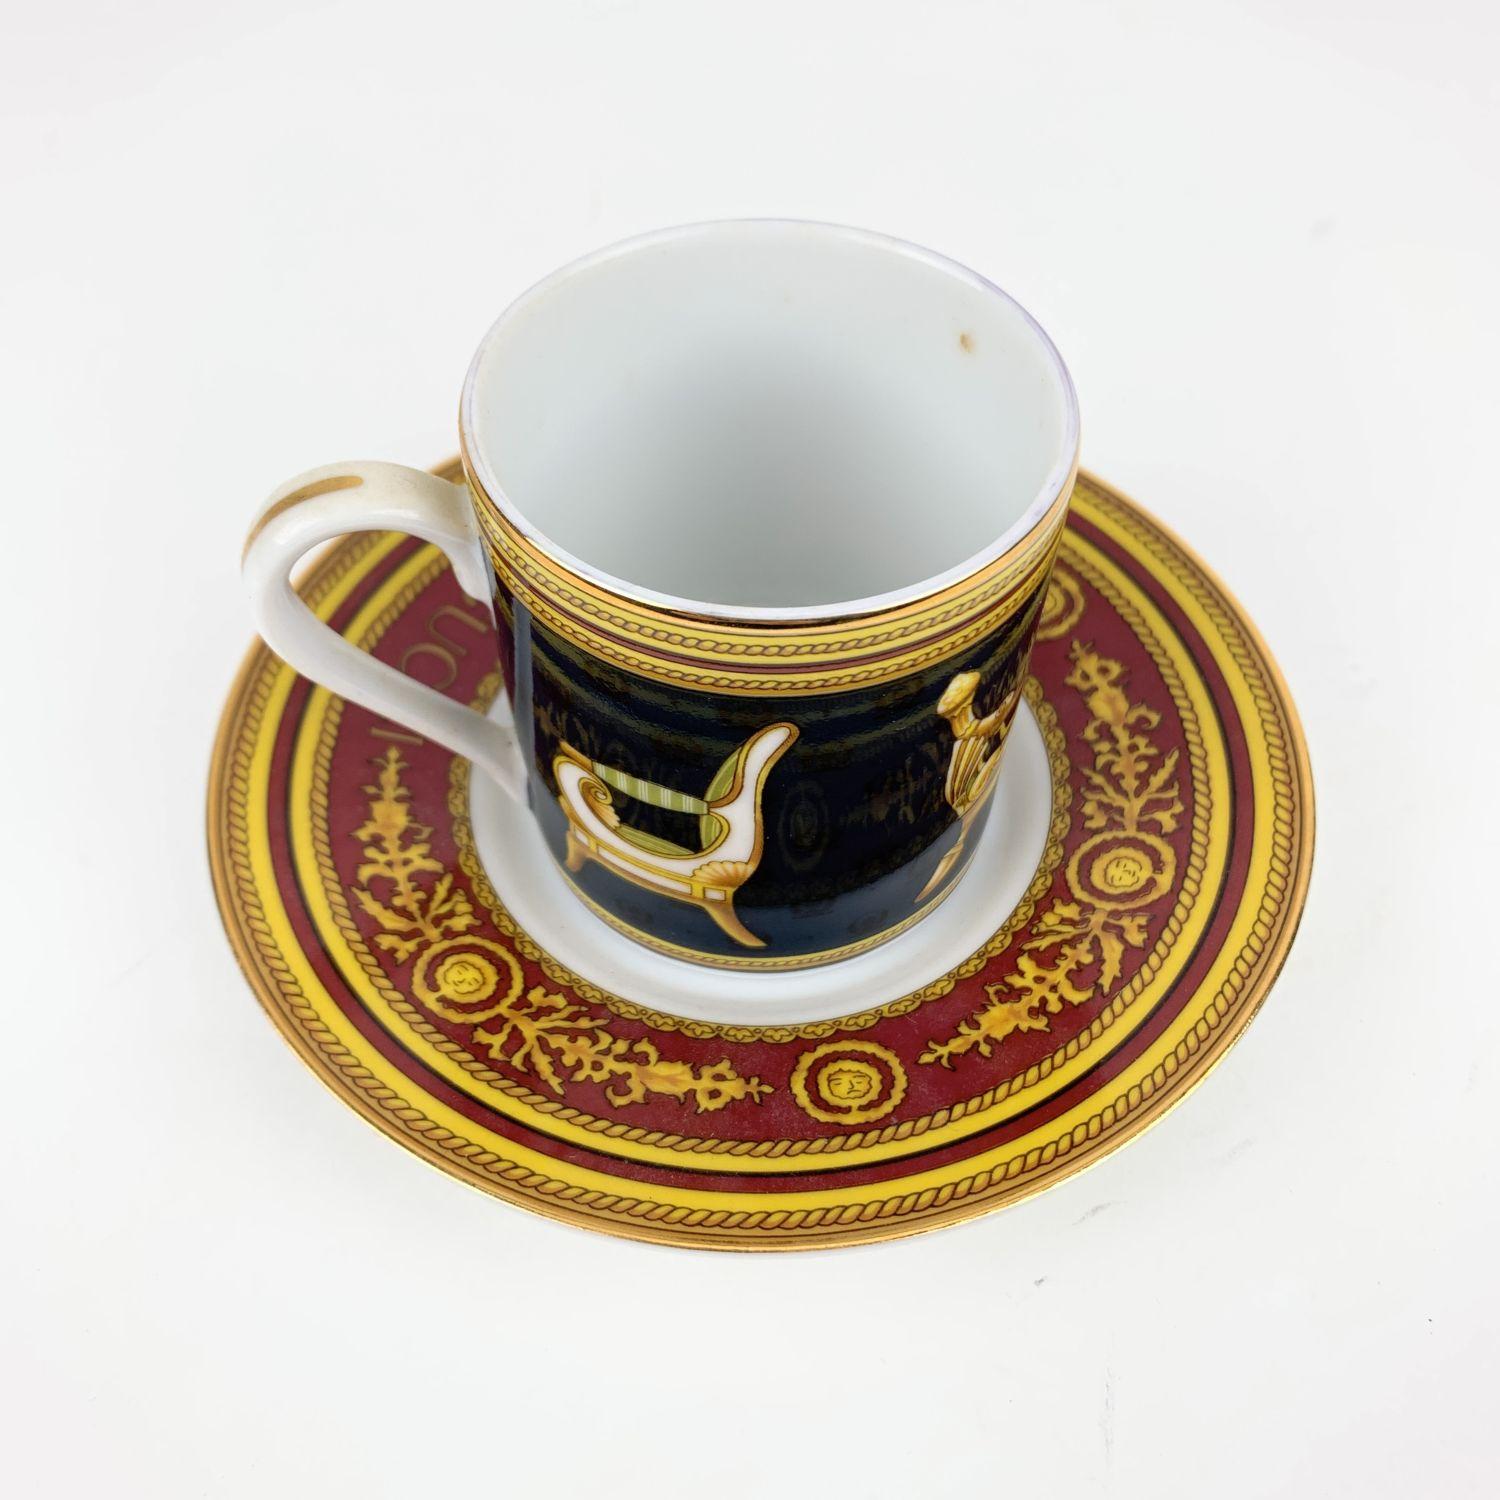 Vintage Gucci porcelain coffee cup and saucer. Crafted of fine porcelain. The cup feature an upper gold rim, a chair designs on a dark blue background . The saucer is in burgundy and yellow color with GUCCI signature on top. 'Gucci Porcellana'